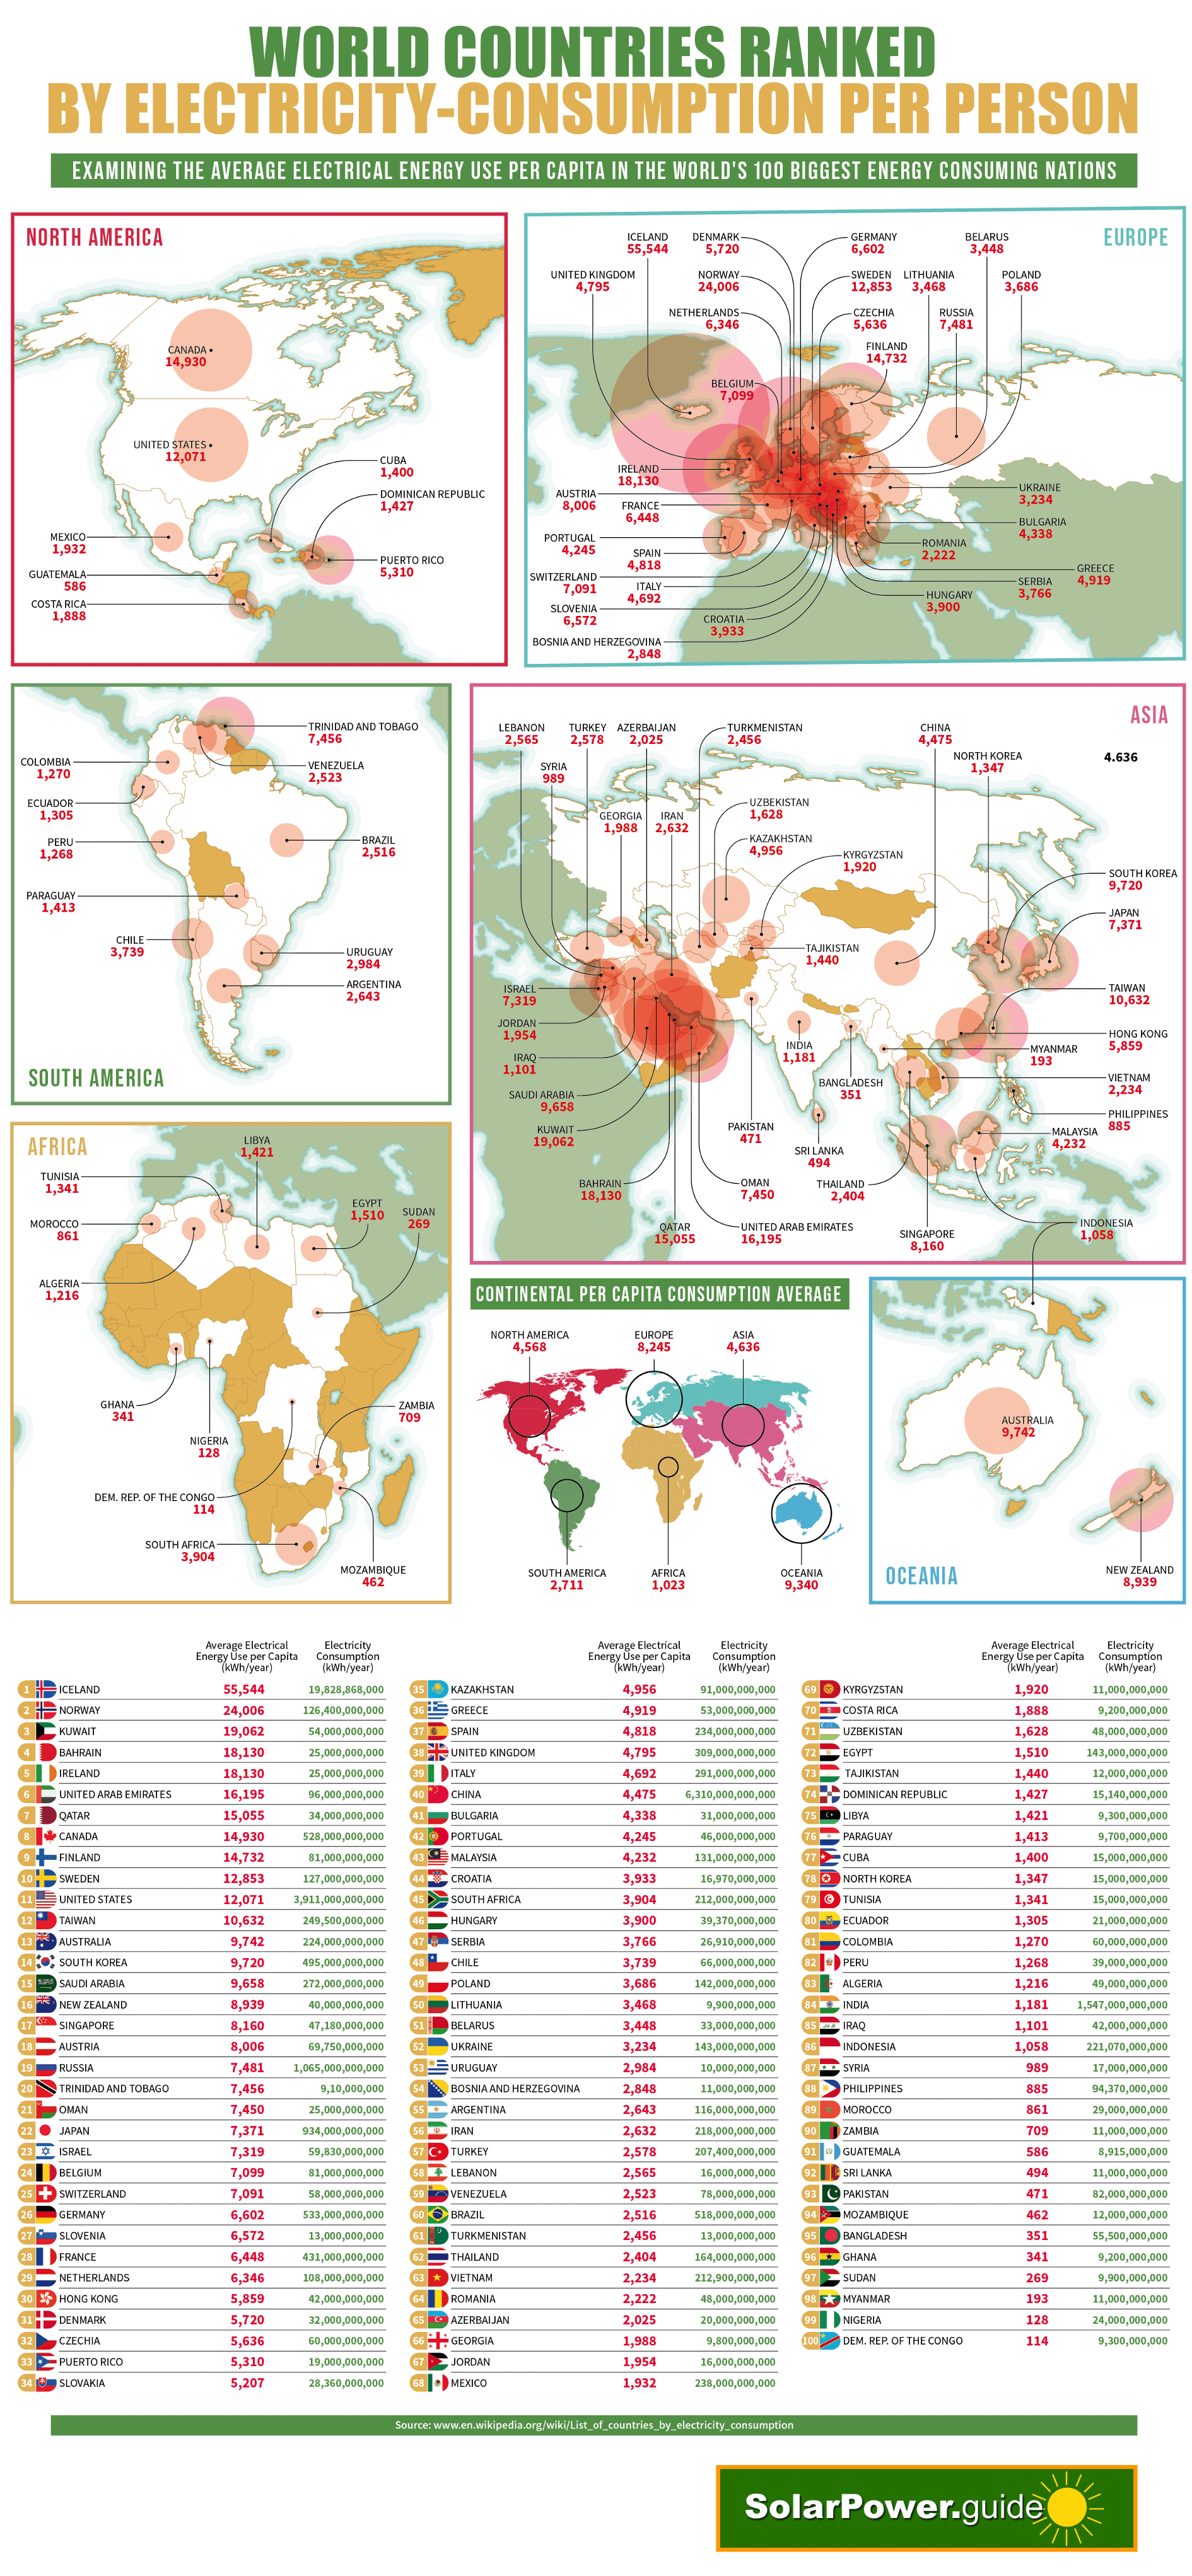 World Countries Ranked by Electricity Consumption Per Person - SolarPower.Guide - Infographic